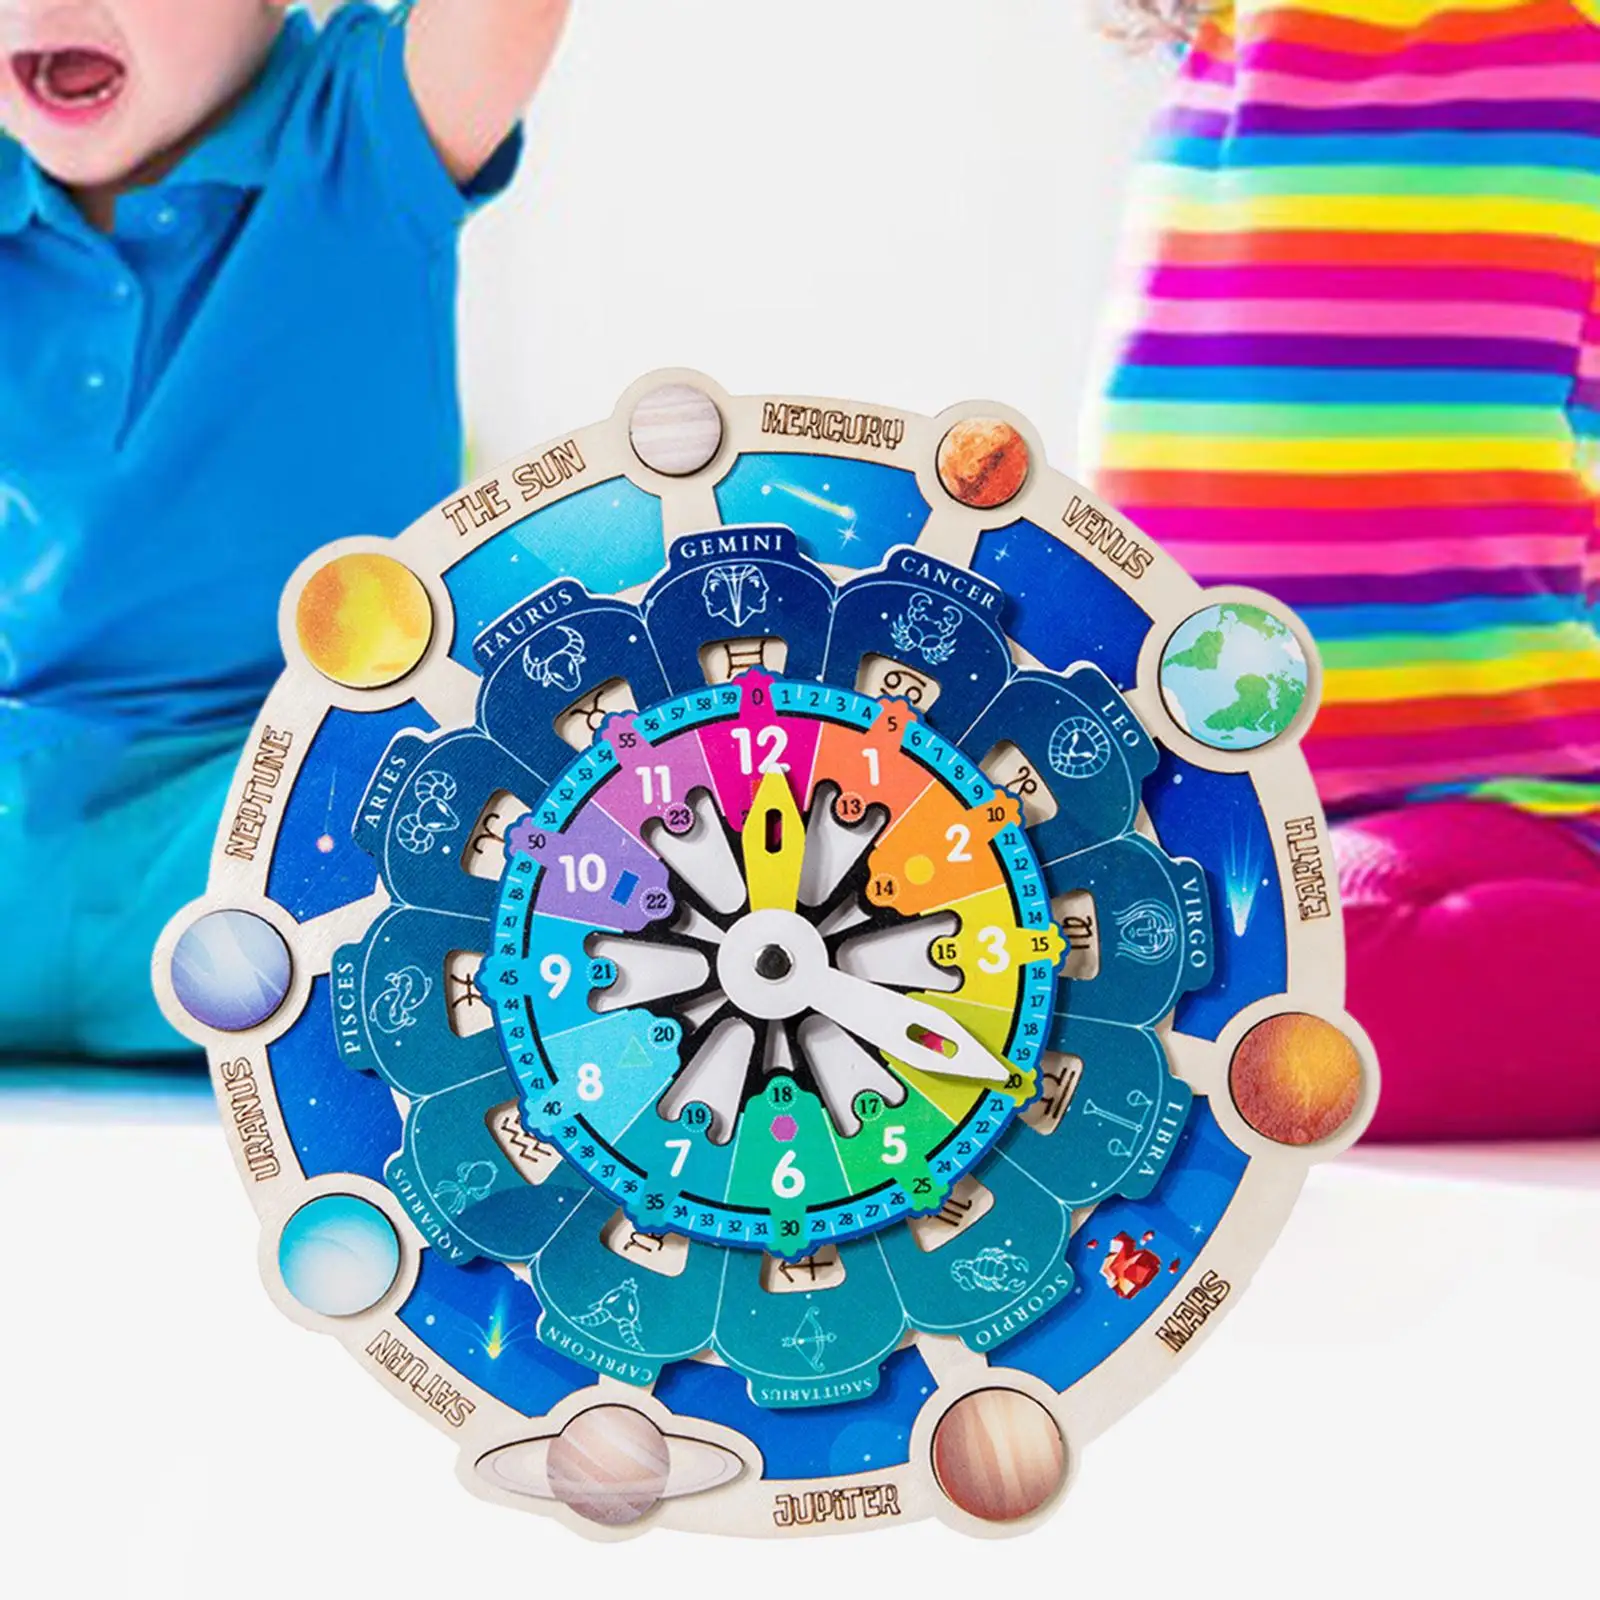 Solar System Puzzles Preschool Educational Learning Gifts Round Space Planets Jigsaw Puzzle Toys for Girls Boys Children Baby